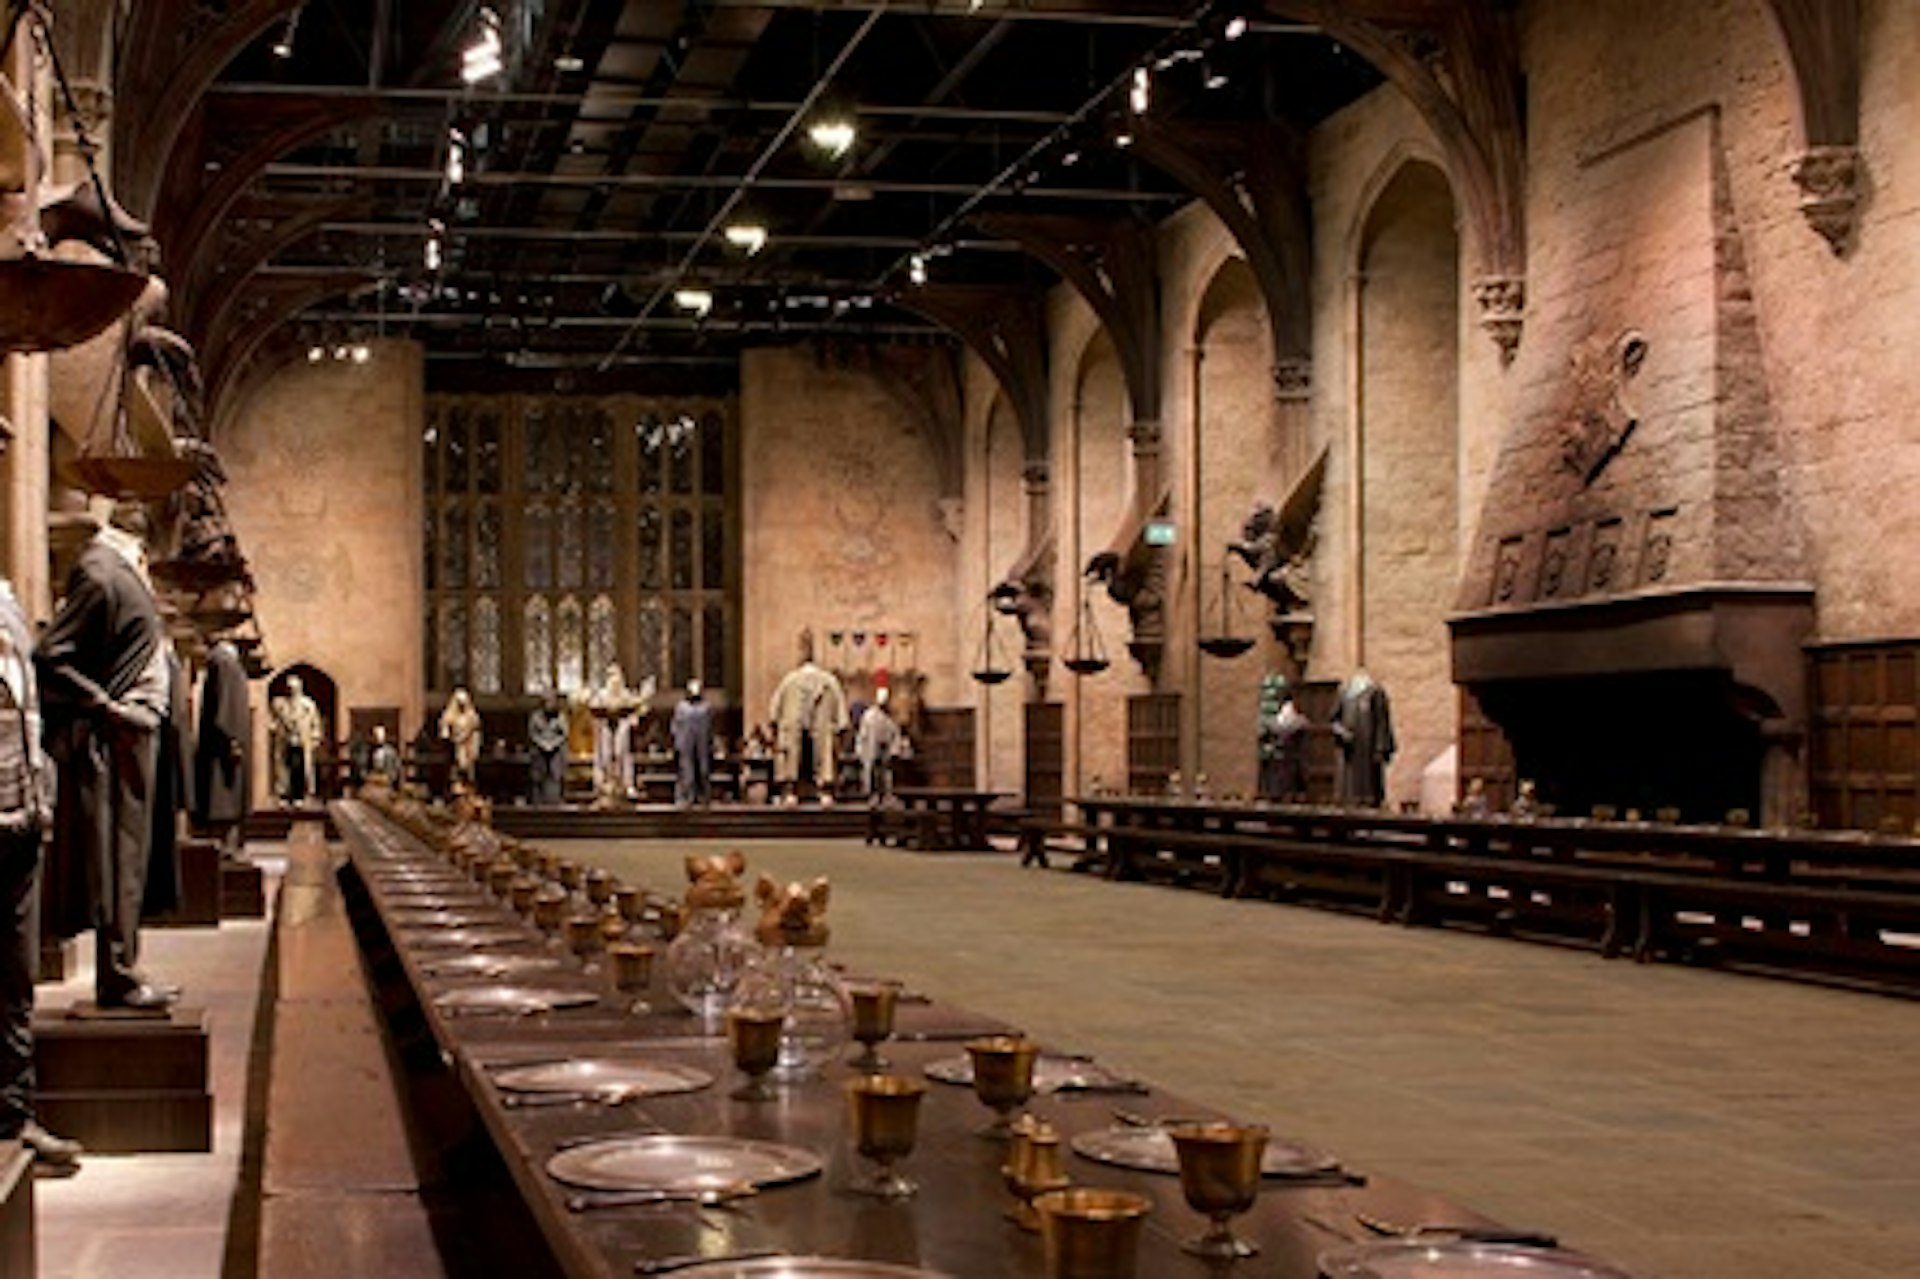 Warner Bros. Studio Tour London - The Making of Harry Potter with Return Transportation for Two Adults and Two Children 3